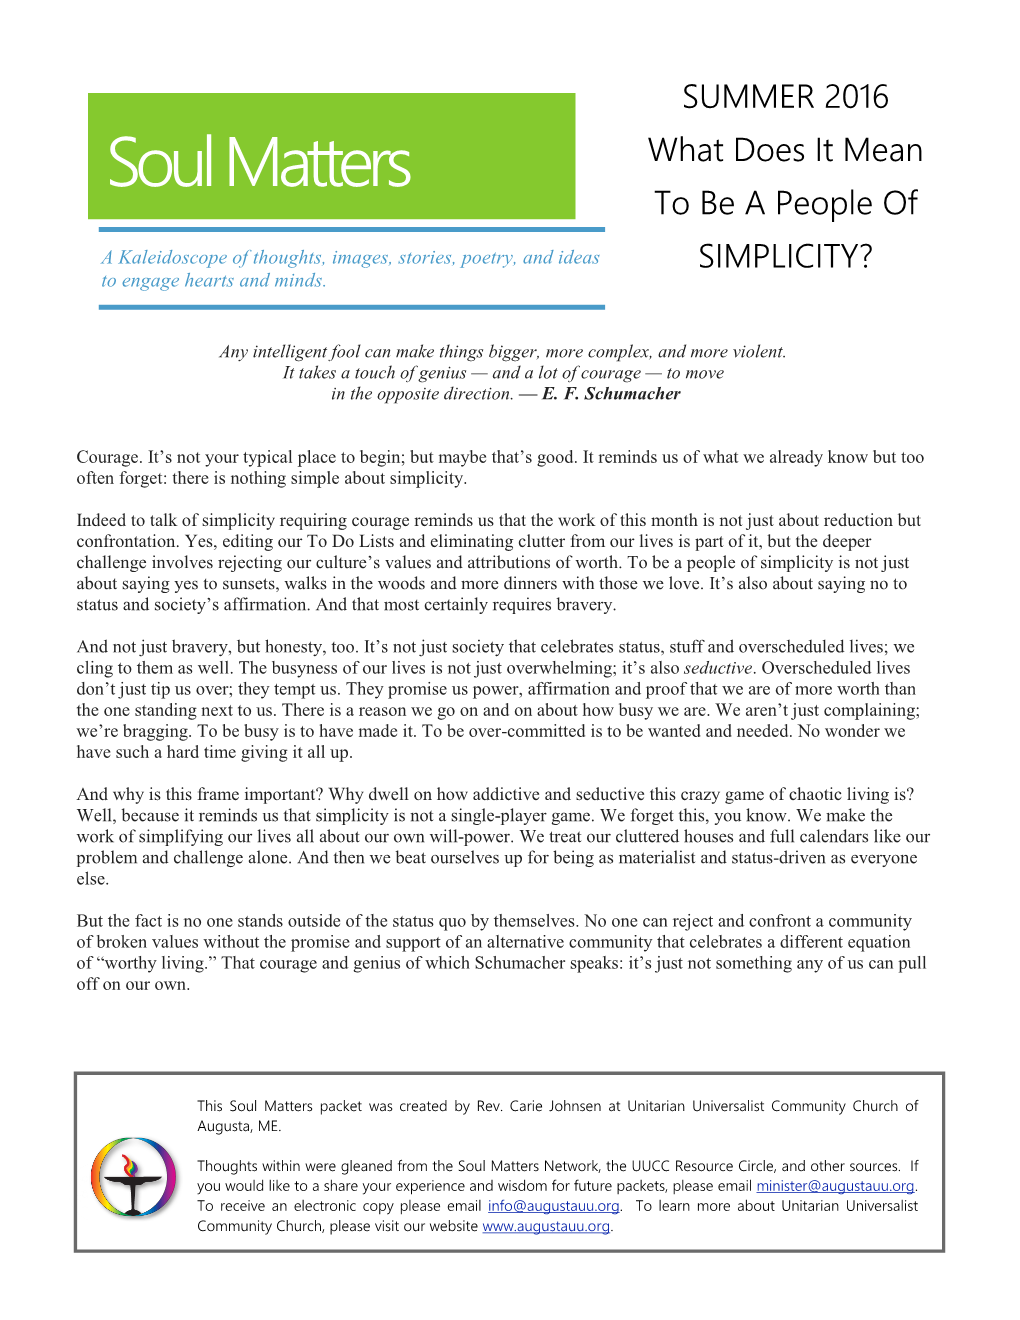 Soul Matters What Does It Mean to Be a People Of